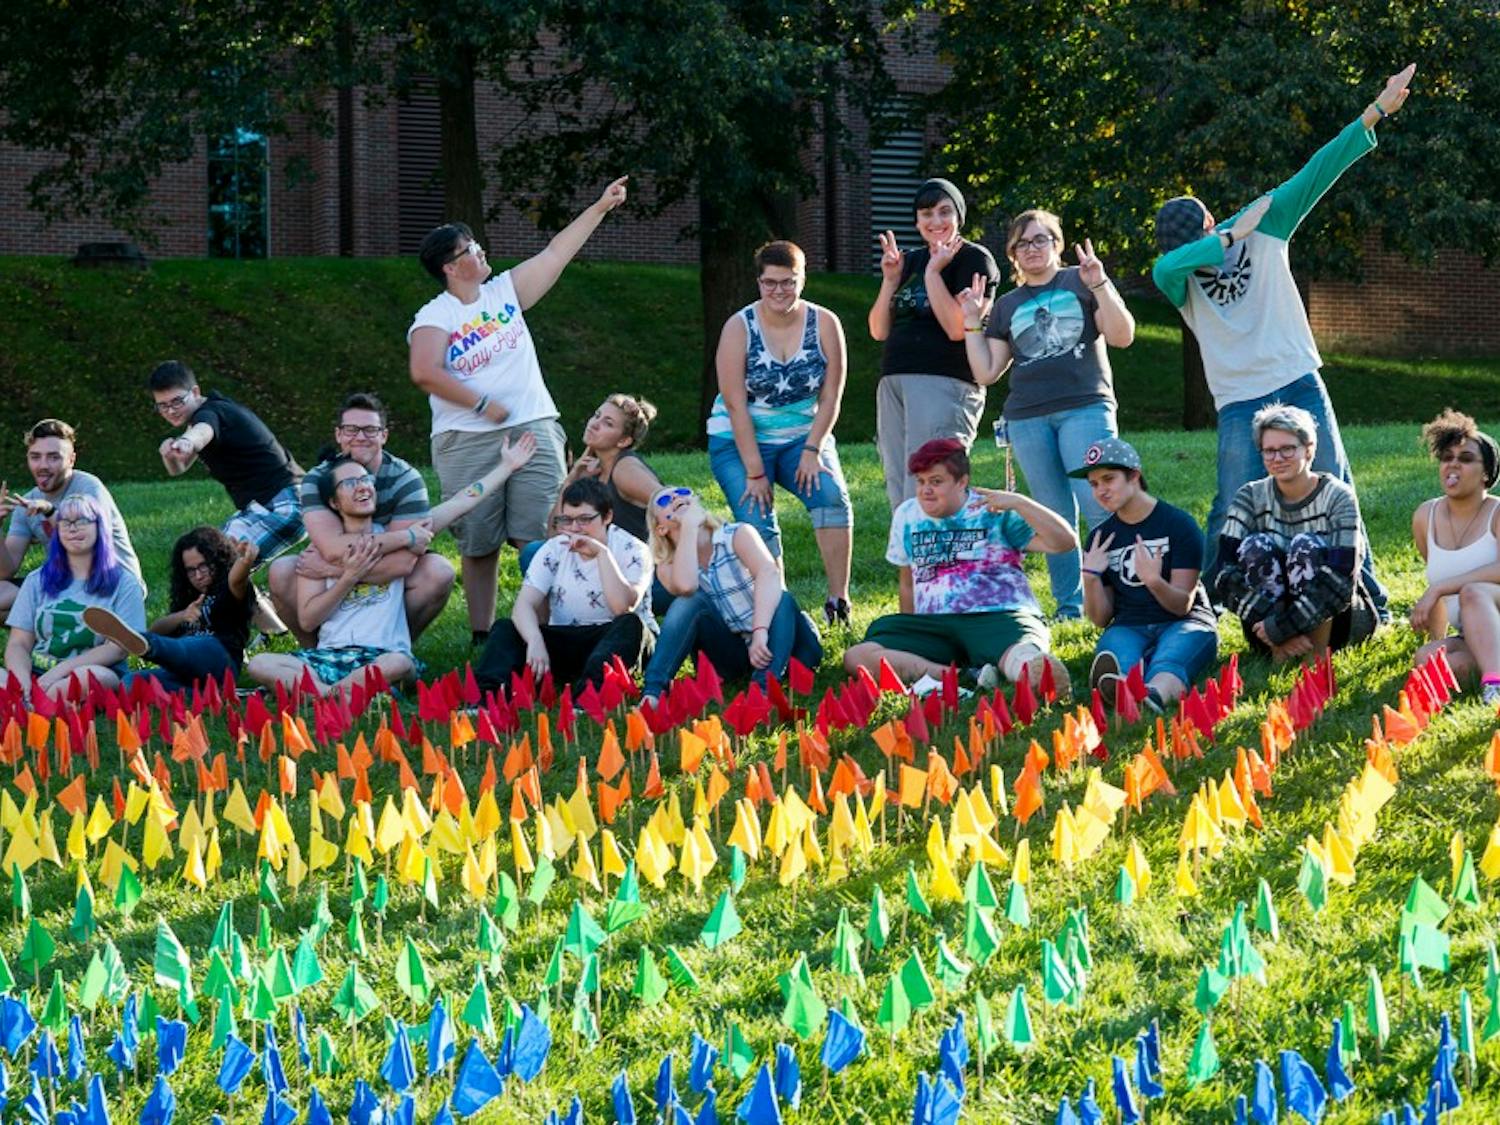 Eastern Michigan students pose for a picture after completing the OUTober Flag Display outside Pray-Harrold on EMU's campus, 7 Oct.